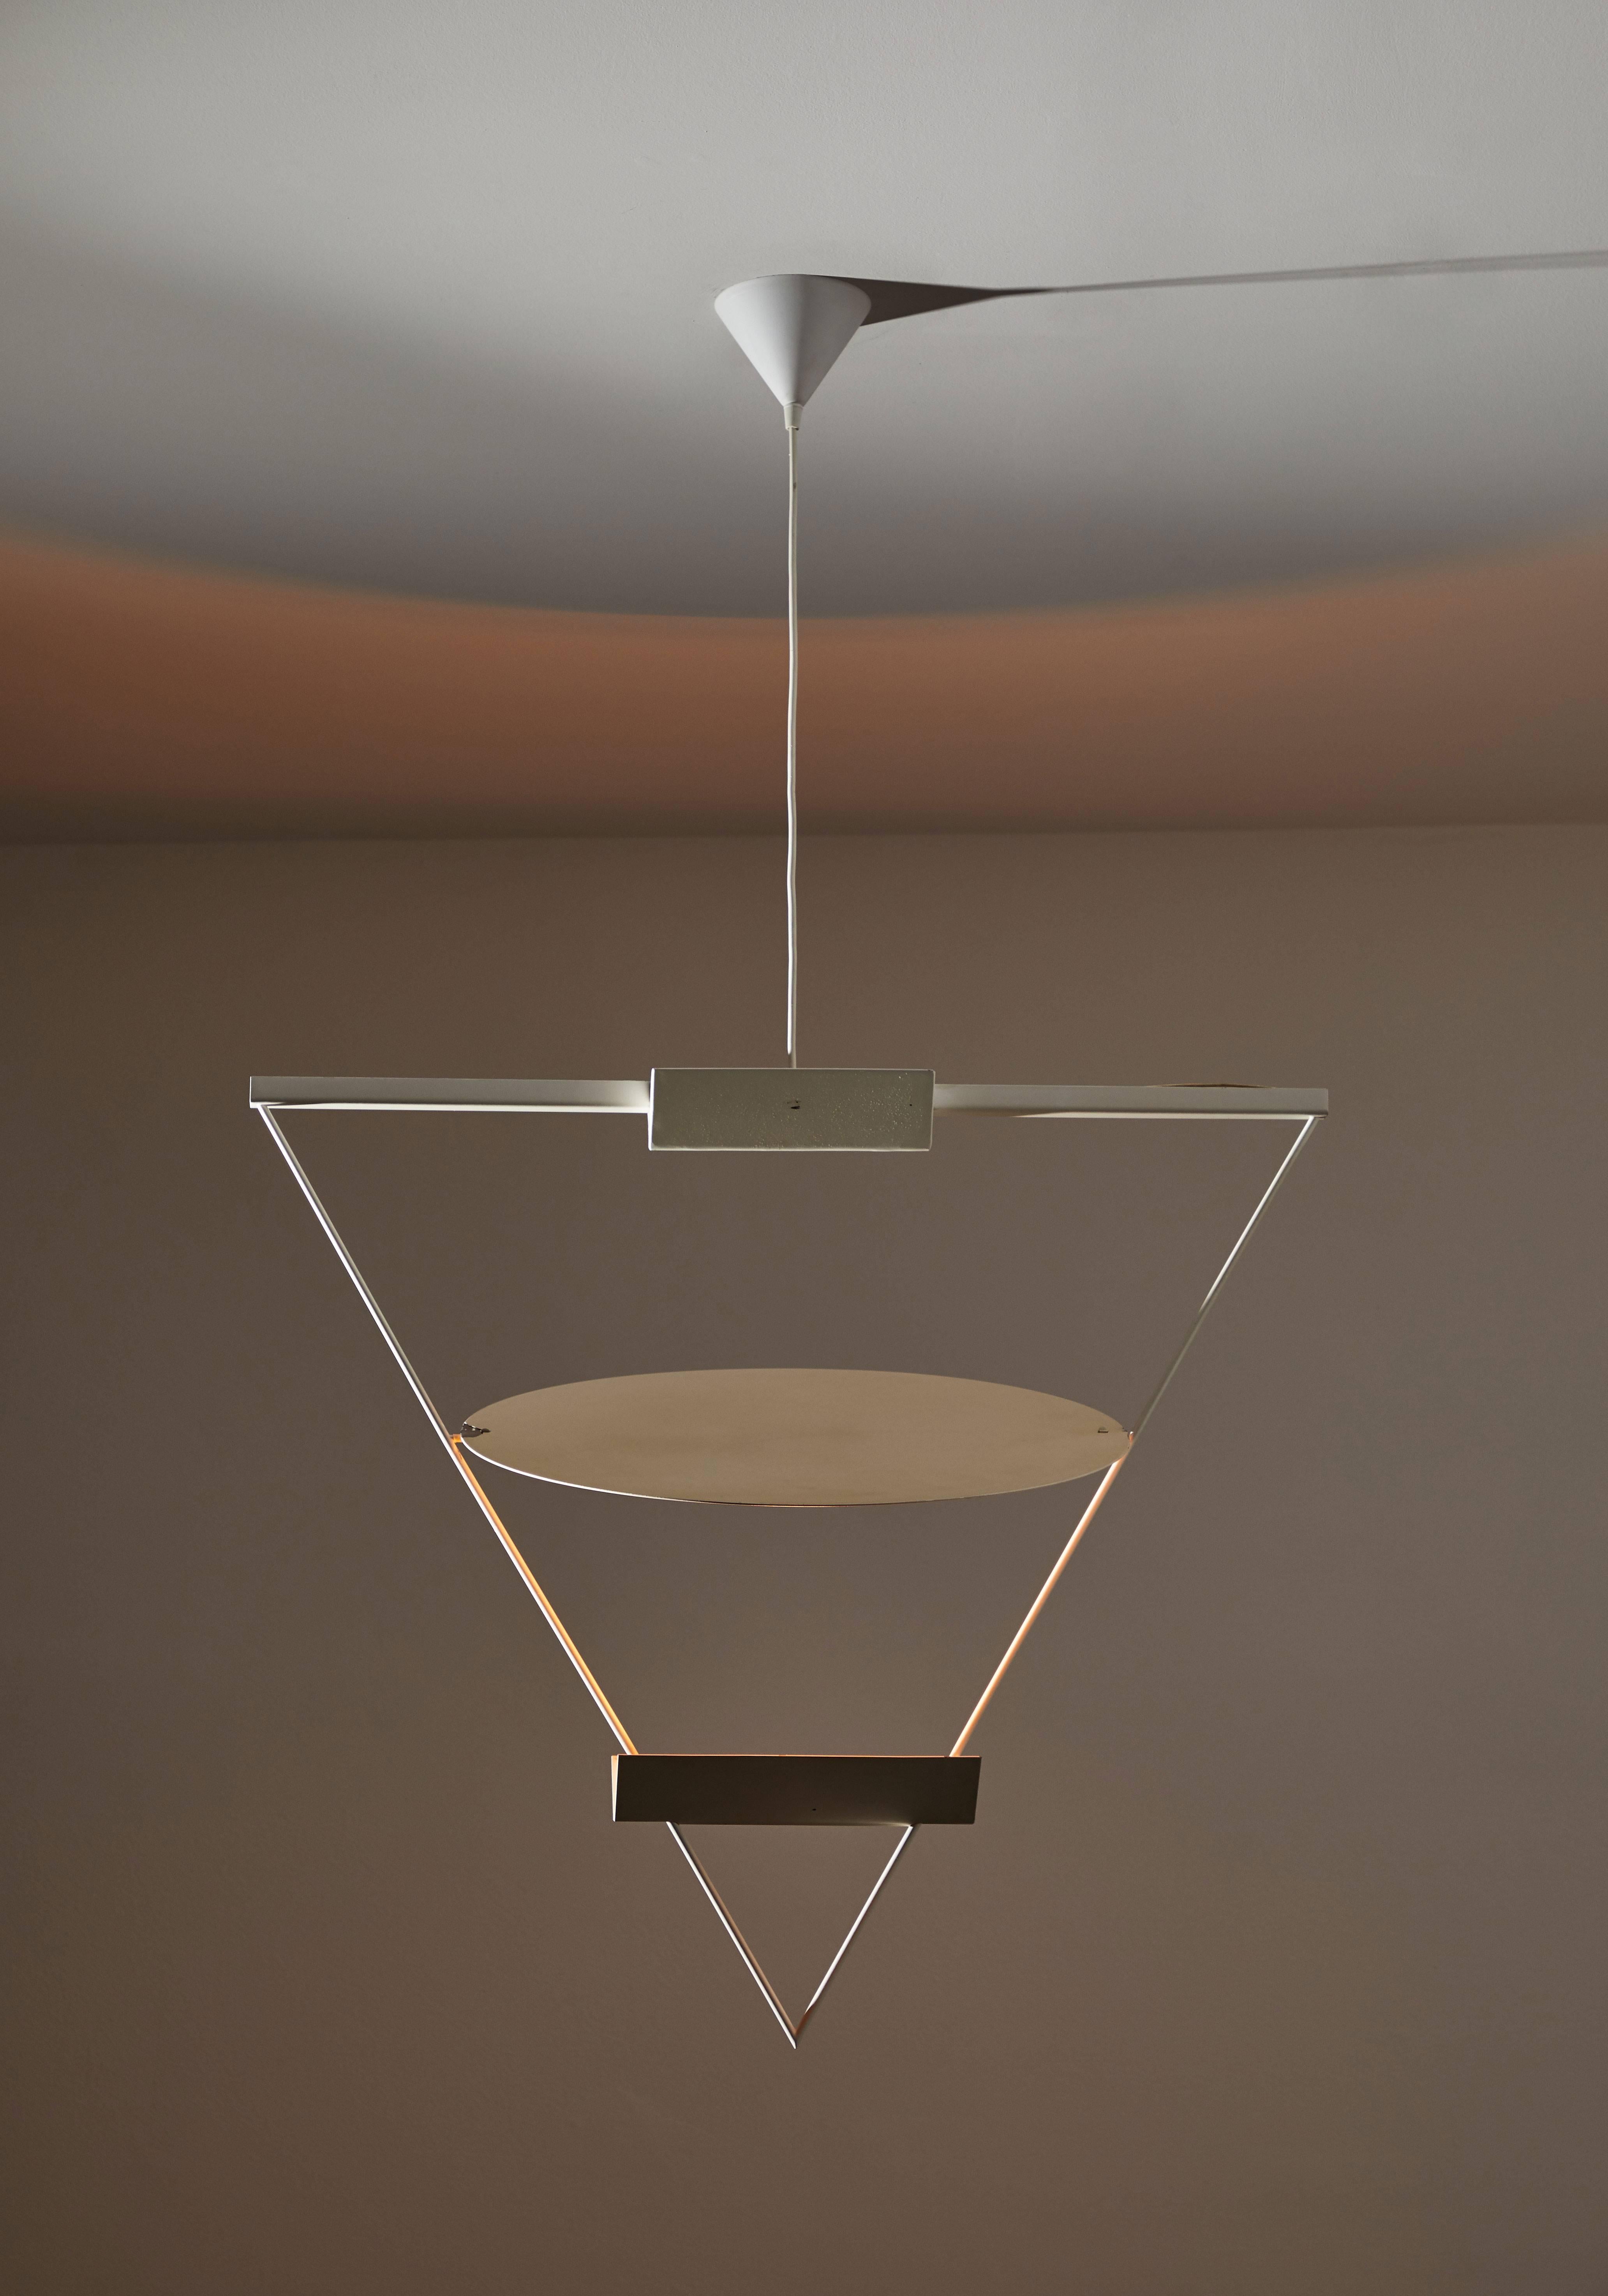 Triangular pendant by Mario Botta for Artemide. Designed and manufactured in Italy, circa 1980s. Enameled metal triangular shaped structure which houses a singular halogen bulb. Circular panel can be adjusted to reflect light in various directions.